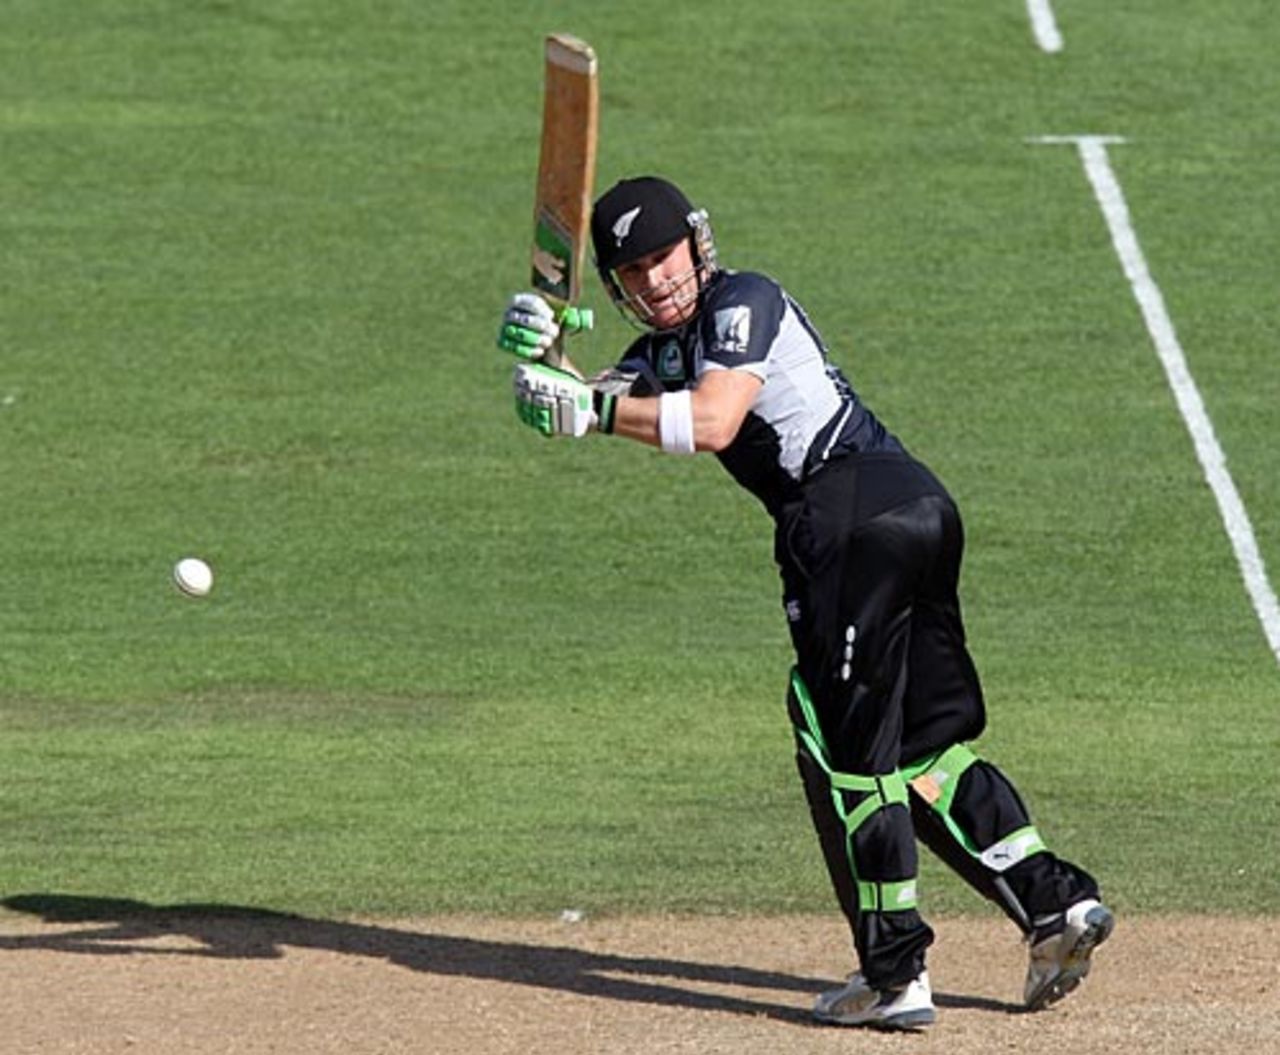 Brendon McCullum clips one off his toes, New Zealand v West Indies, 5th ODI, Napier, January 13, 2009